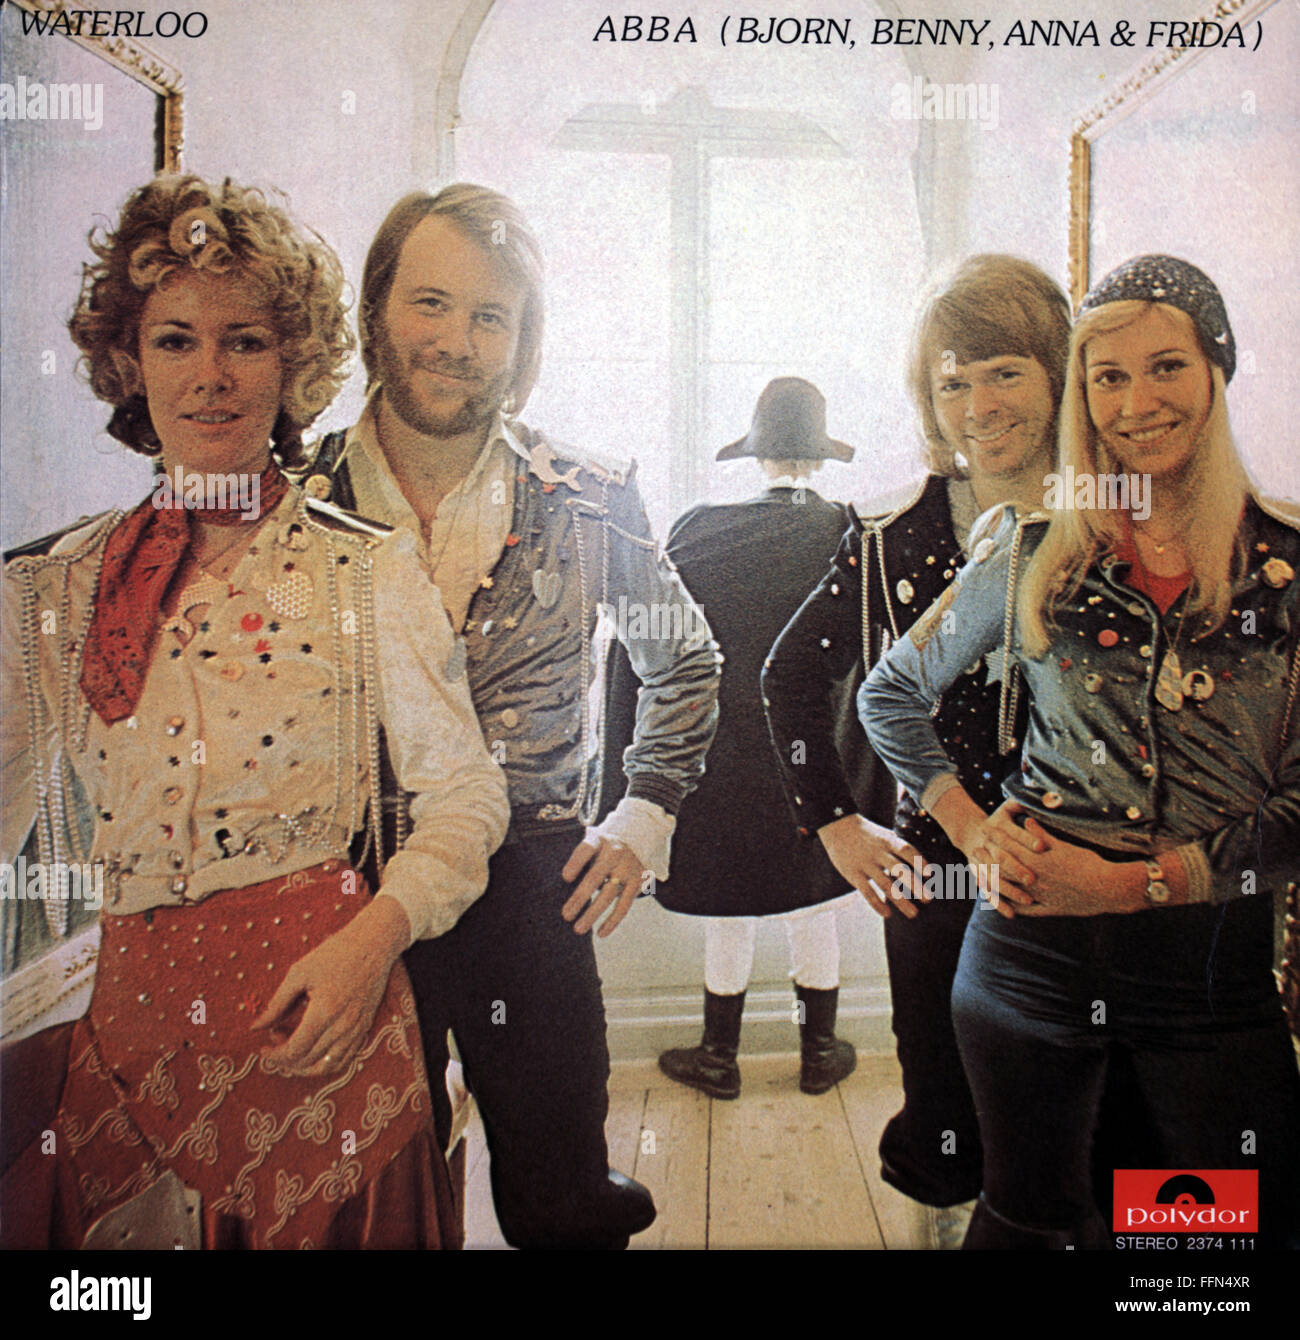 Musica, dischi, 'Waterloo', di ABBA, Cover, Polar Music, Polydor, 1974, Additional-Rights-Clearences-Not available Foto Stock